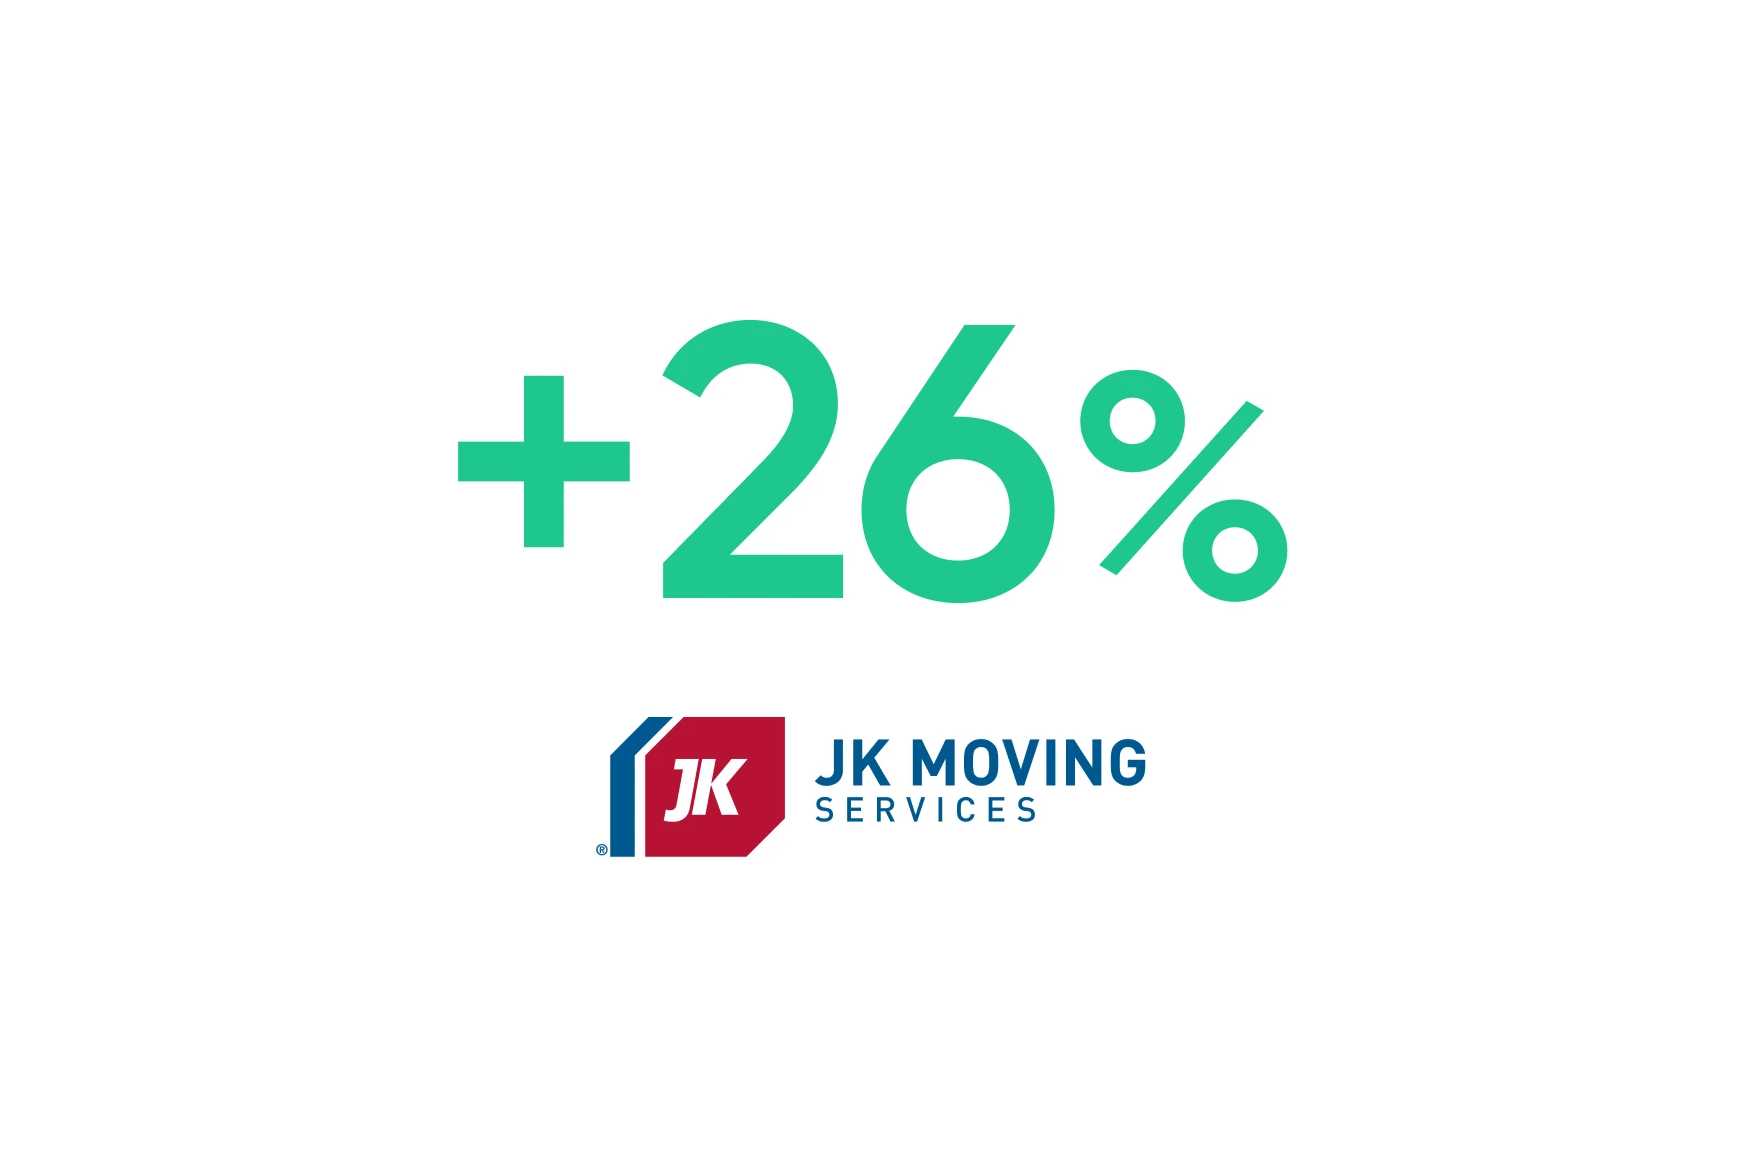 JK Moving Services: AI-based optimization increases sales conversion by 26%